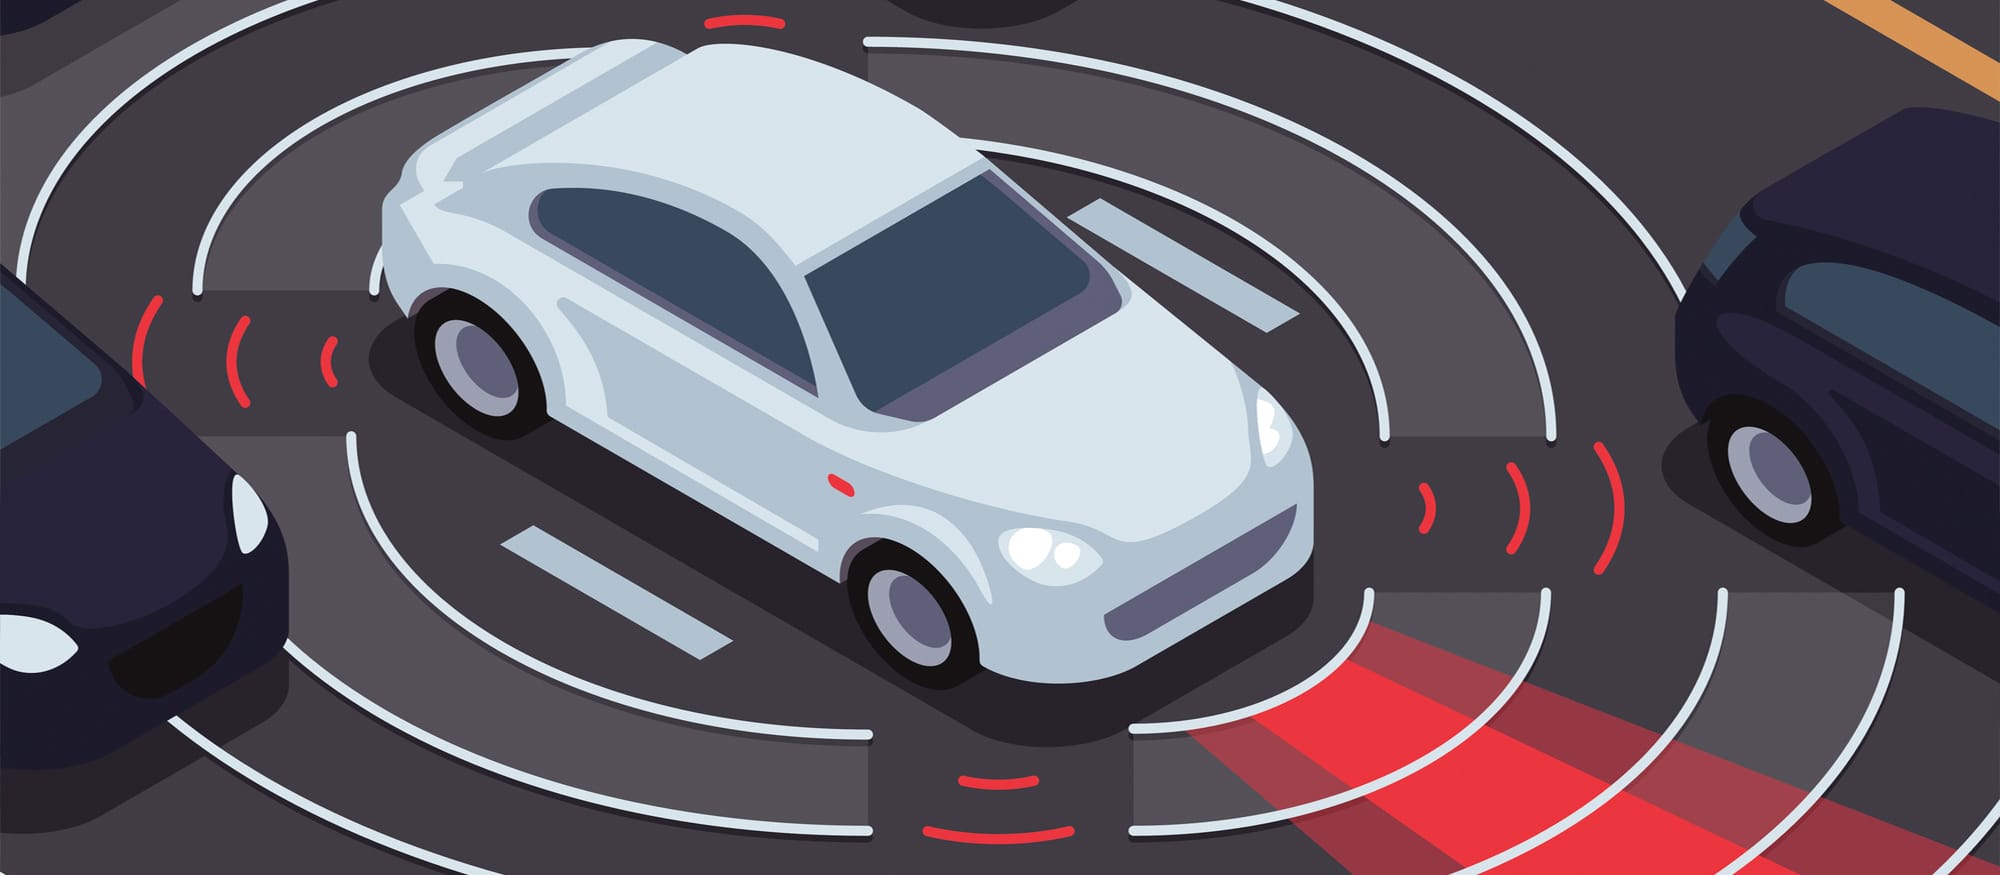 Machine Learning to Help Autonomous Vehicles See